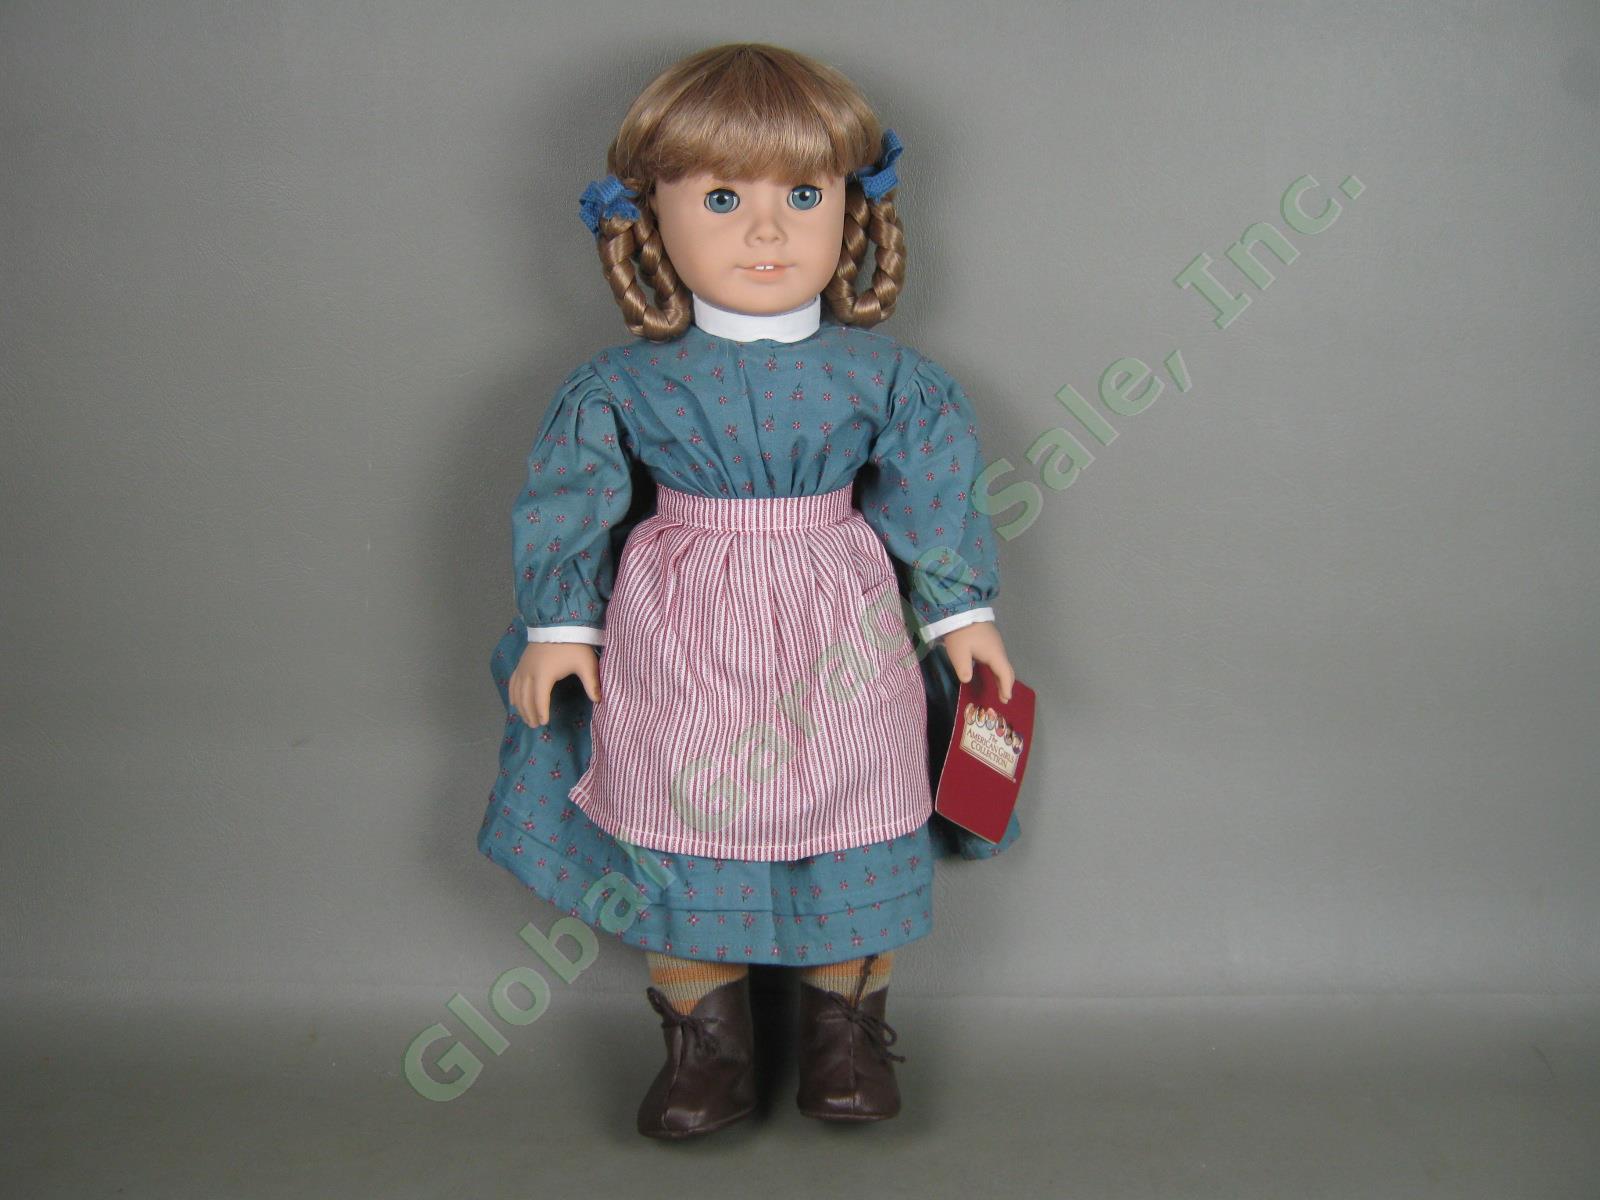 Vintage American Girl 18" Kirsten Doll Pleasant Company Christmas 1994 Exc Cond!